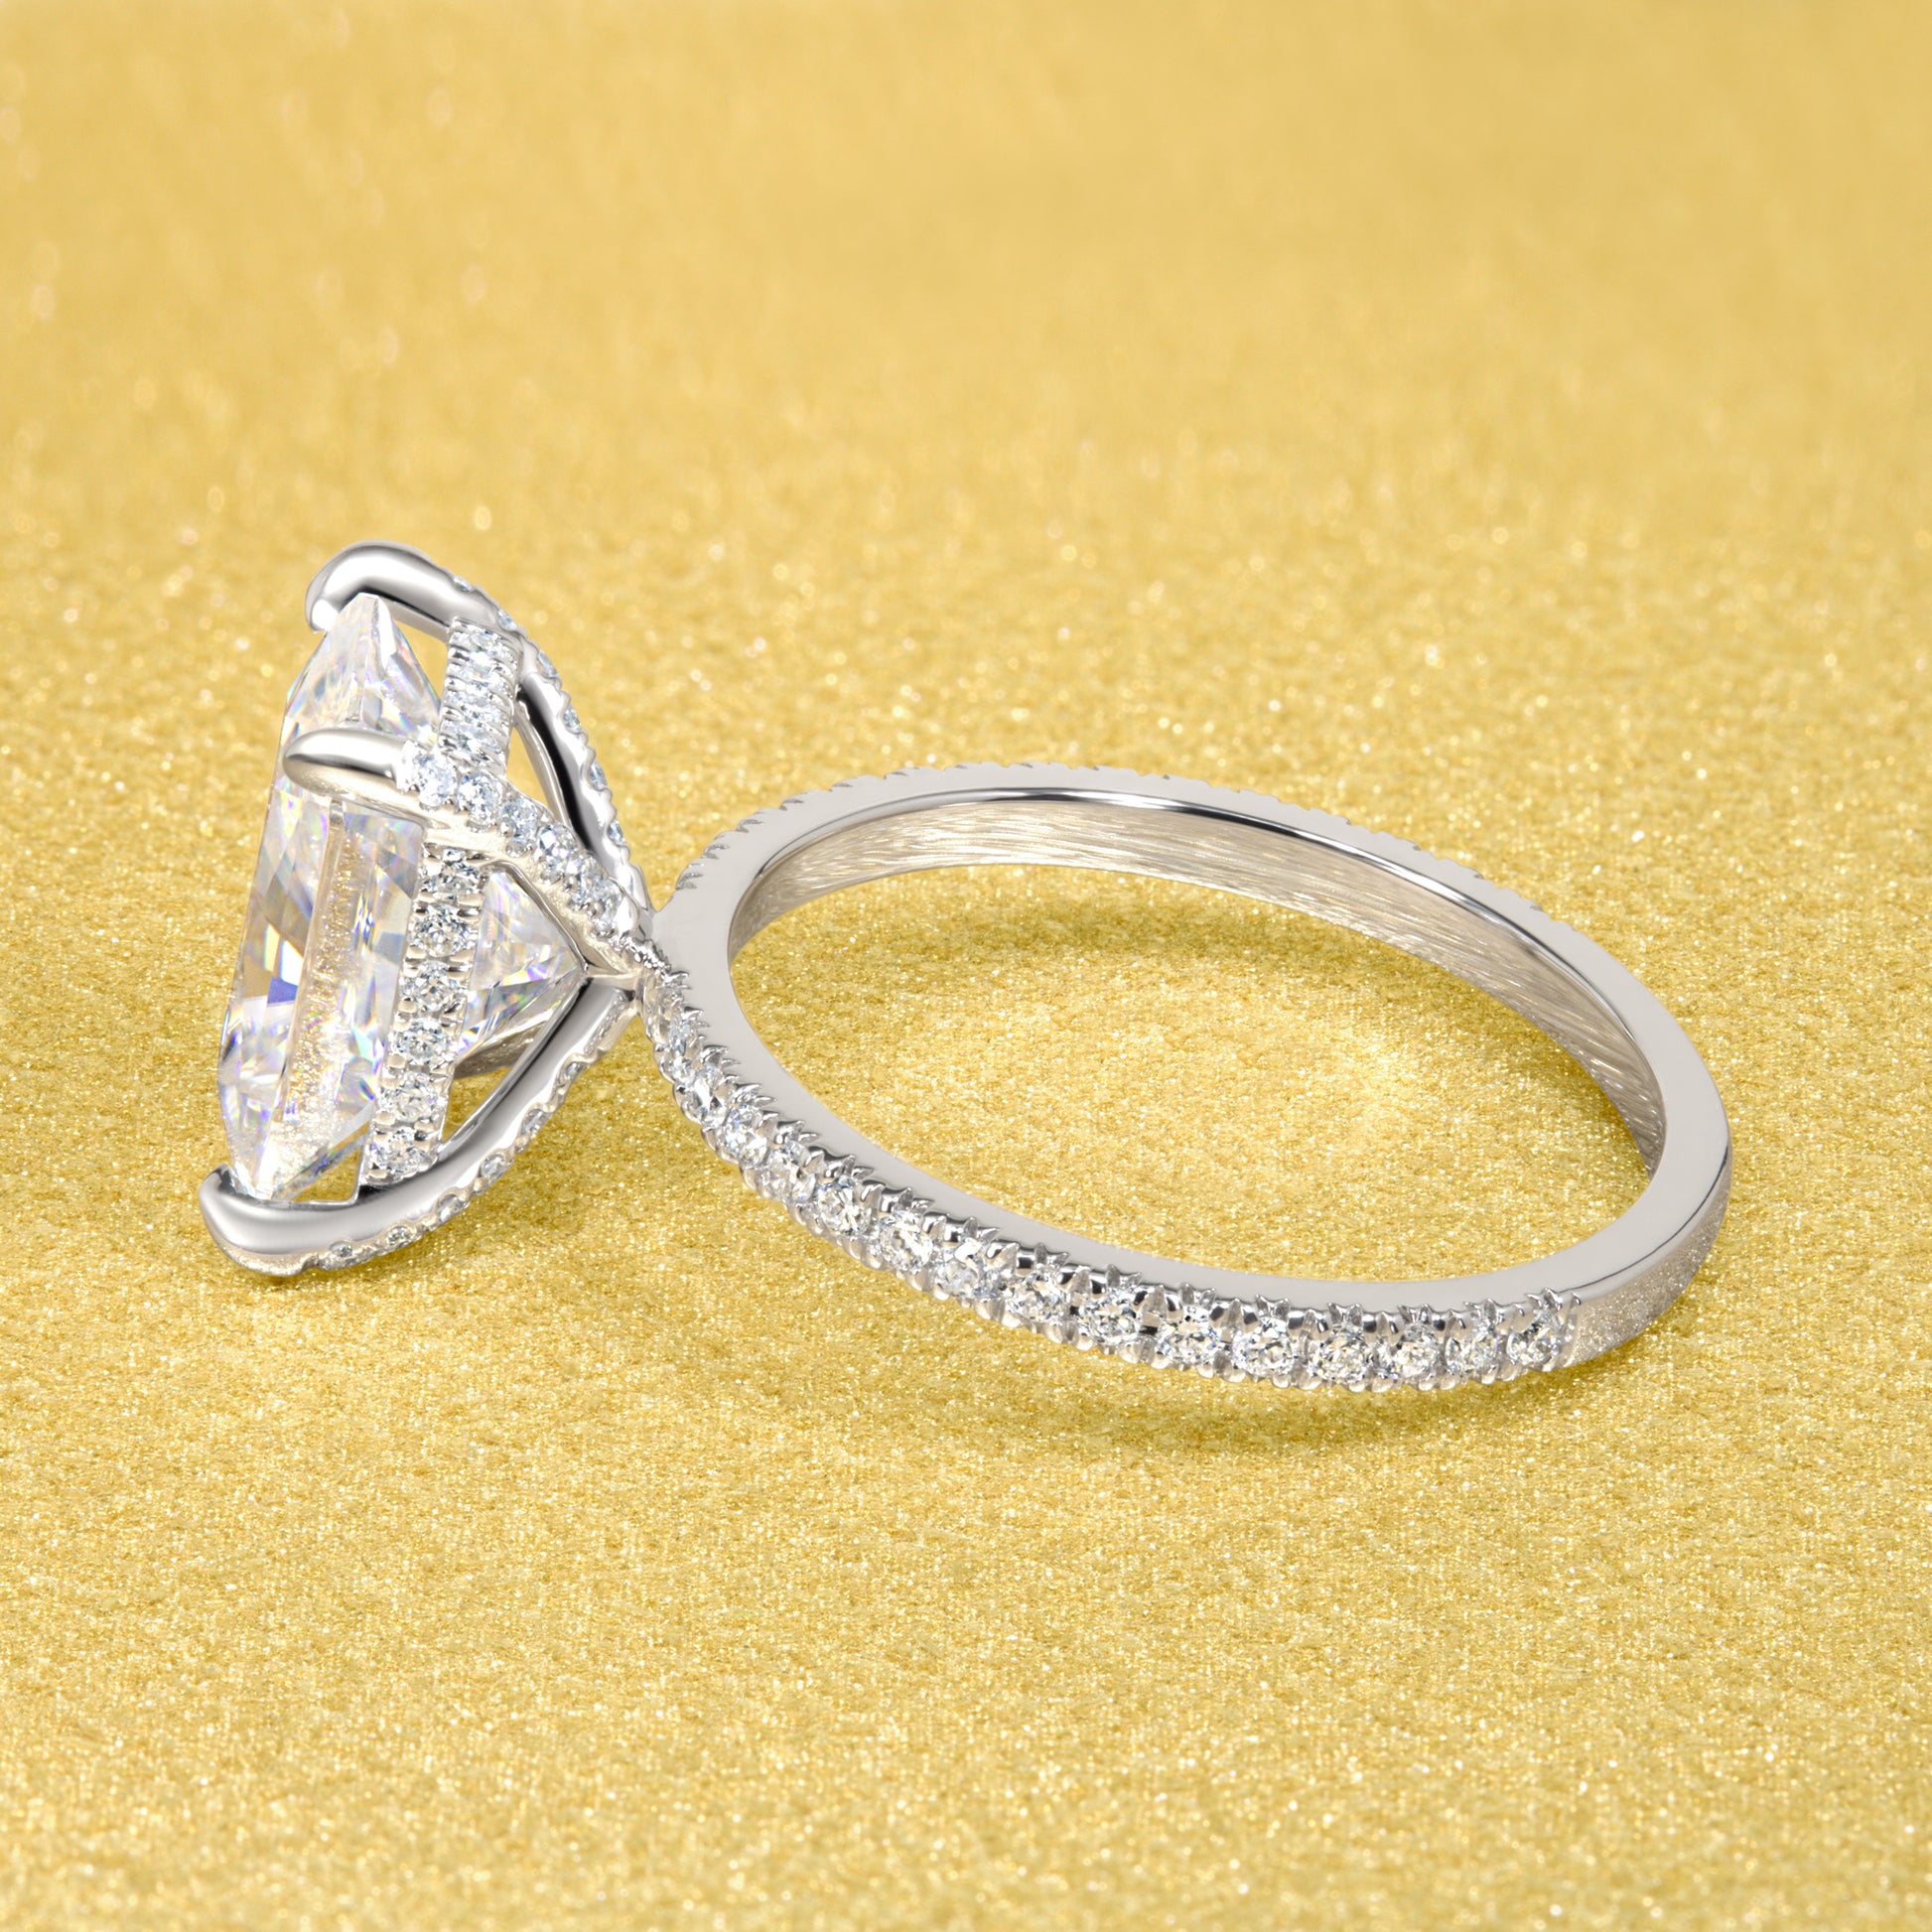 Stella 3.5ct Elongated Radiant-cut Moissanite and Lab-grown Diamond Hidden Wrap Halo Engagement Ring handcrafted in 14K or 18K Gold by Earthena Jewelry